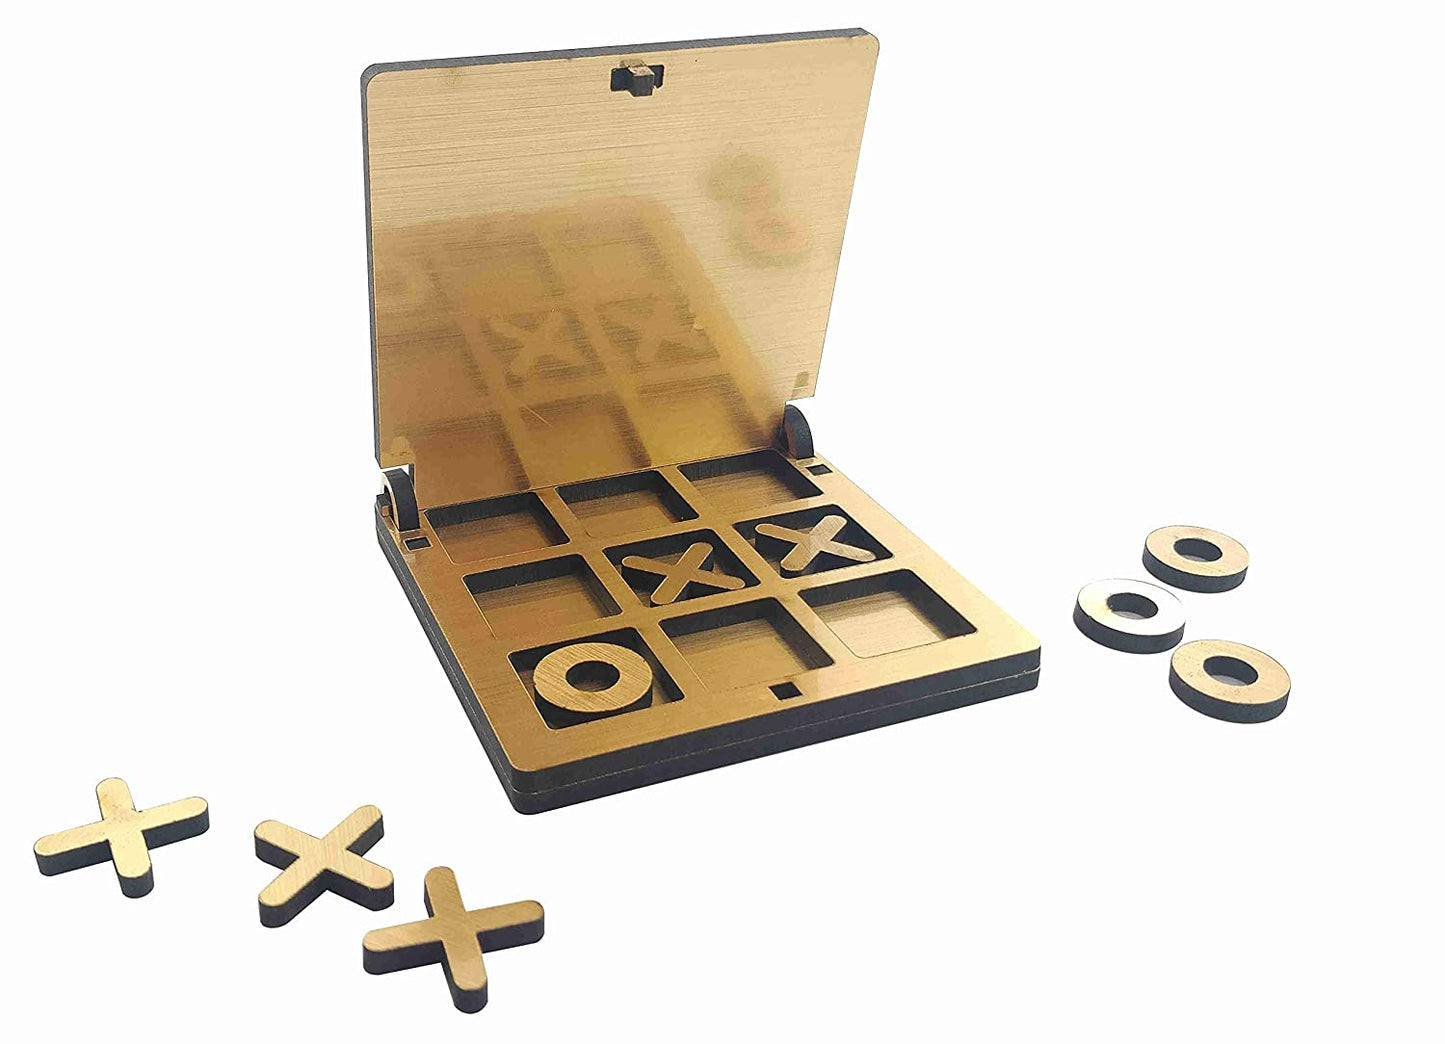 Play Tic Tac Toe, XOX Game, Tic Tac Toe, Wooden Tic Tac Toe Portable Game For Kids And Adults